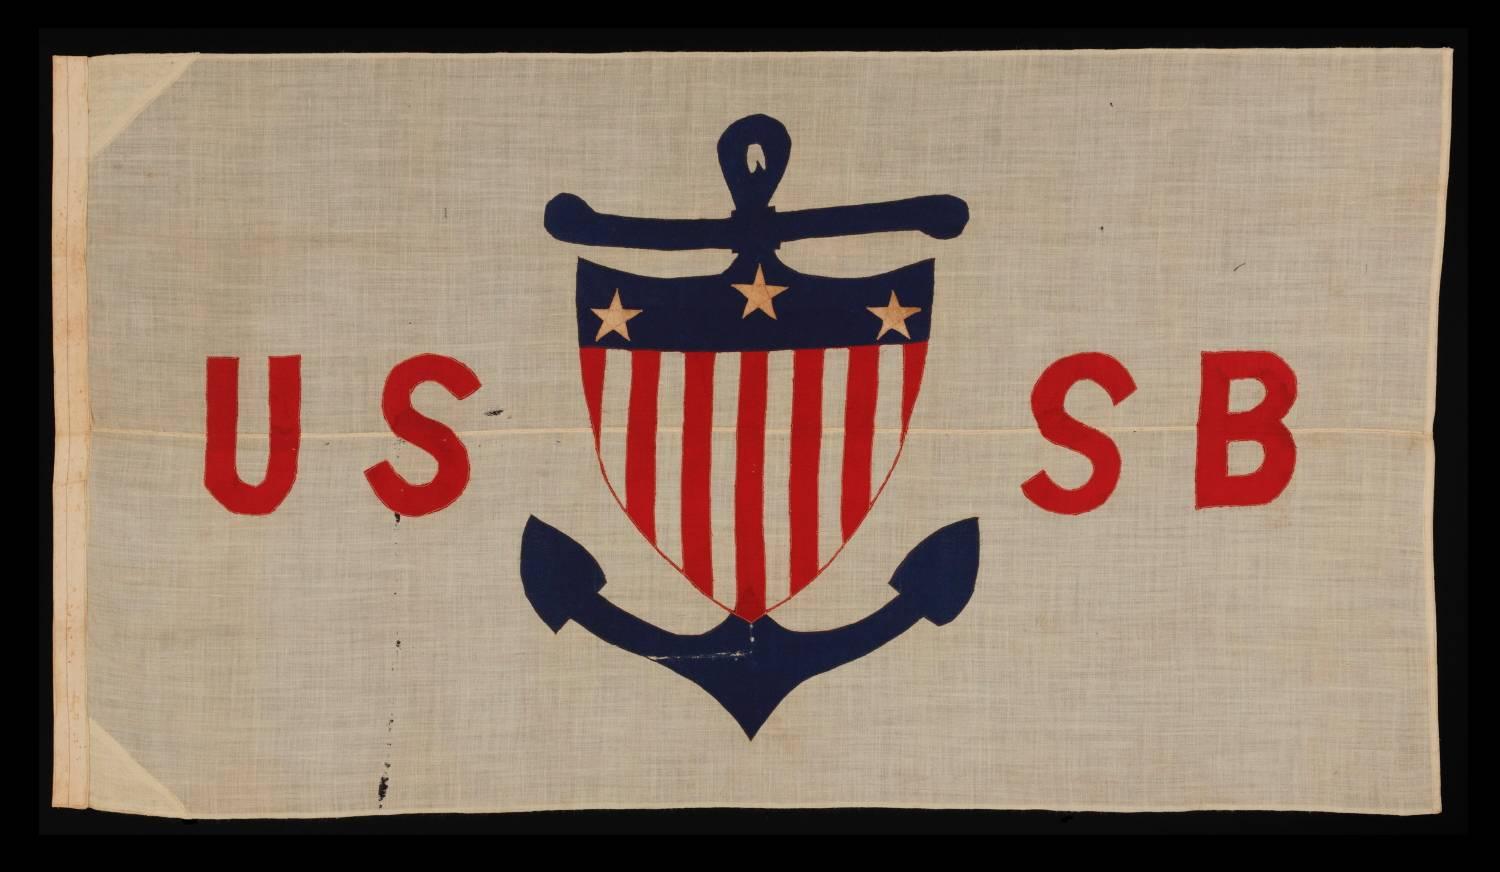 UNITED STATES SHIPPING BOARD FLAG, AN EXTREMELY SCARCE AND BEAUTIFUL, NAUTICAL DESIGN, MADE SOMETIME BETWEEN WWI (U.S. INVOLVEMENT 1917-18) AND 1934: 

Flag of the United States Shipping Board (USSB), an extremely scarce and beautiful design, with